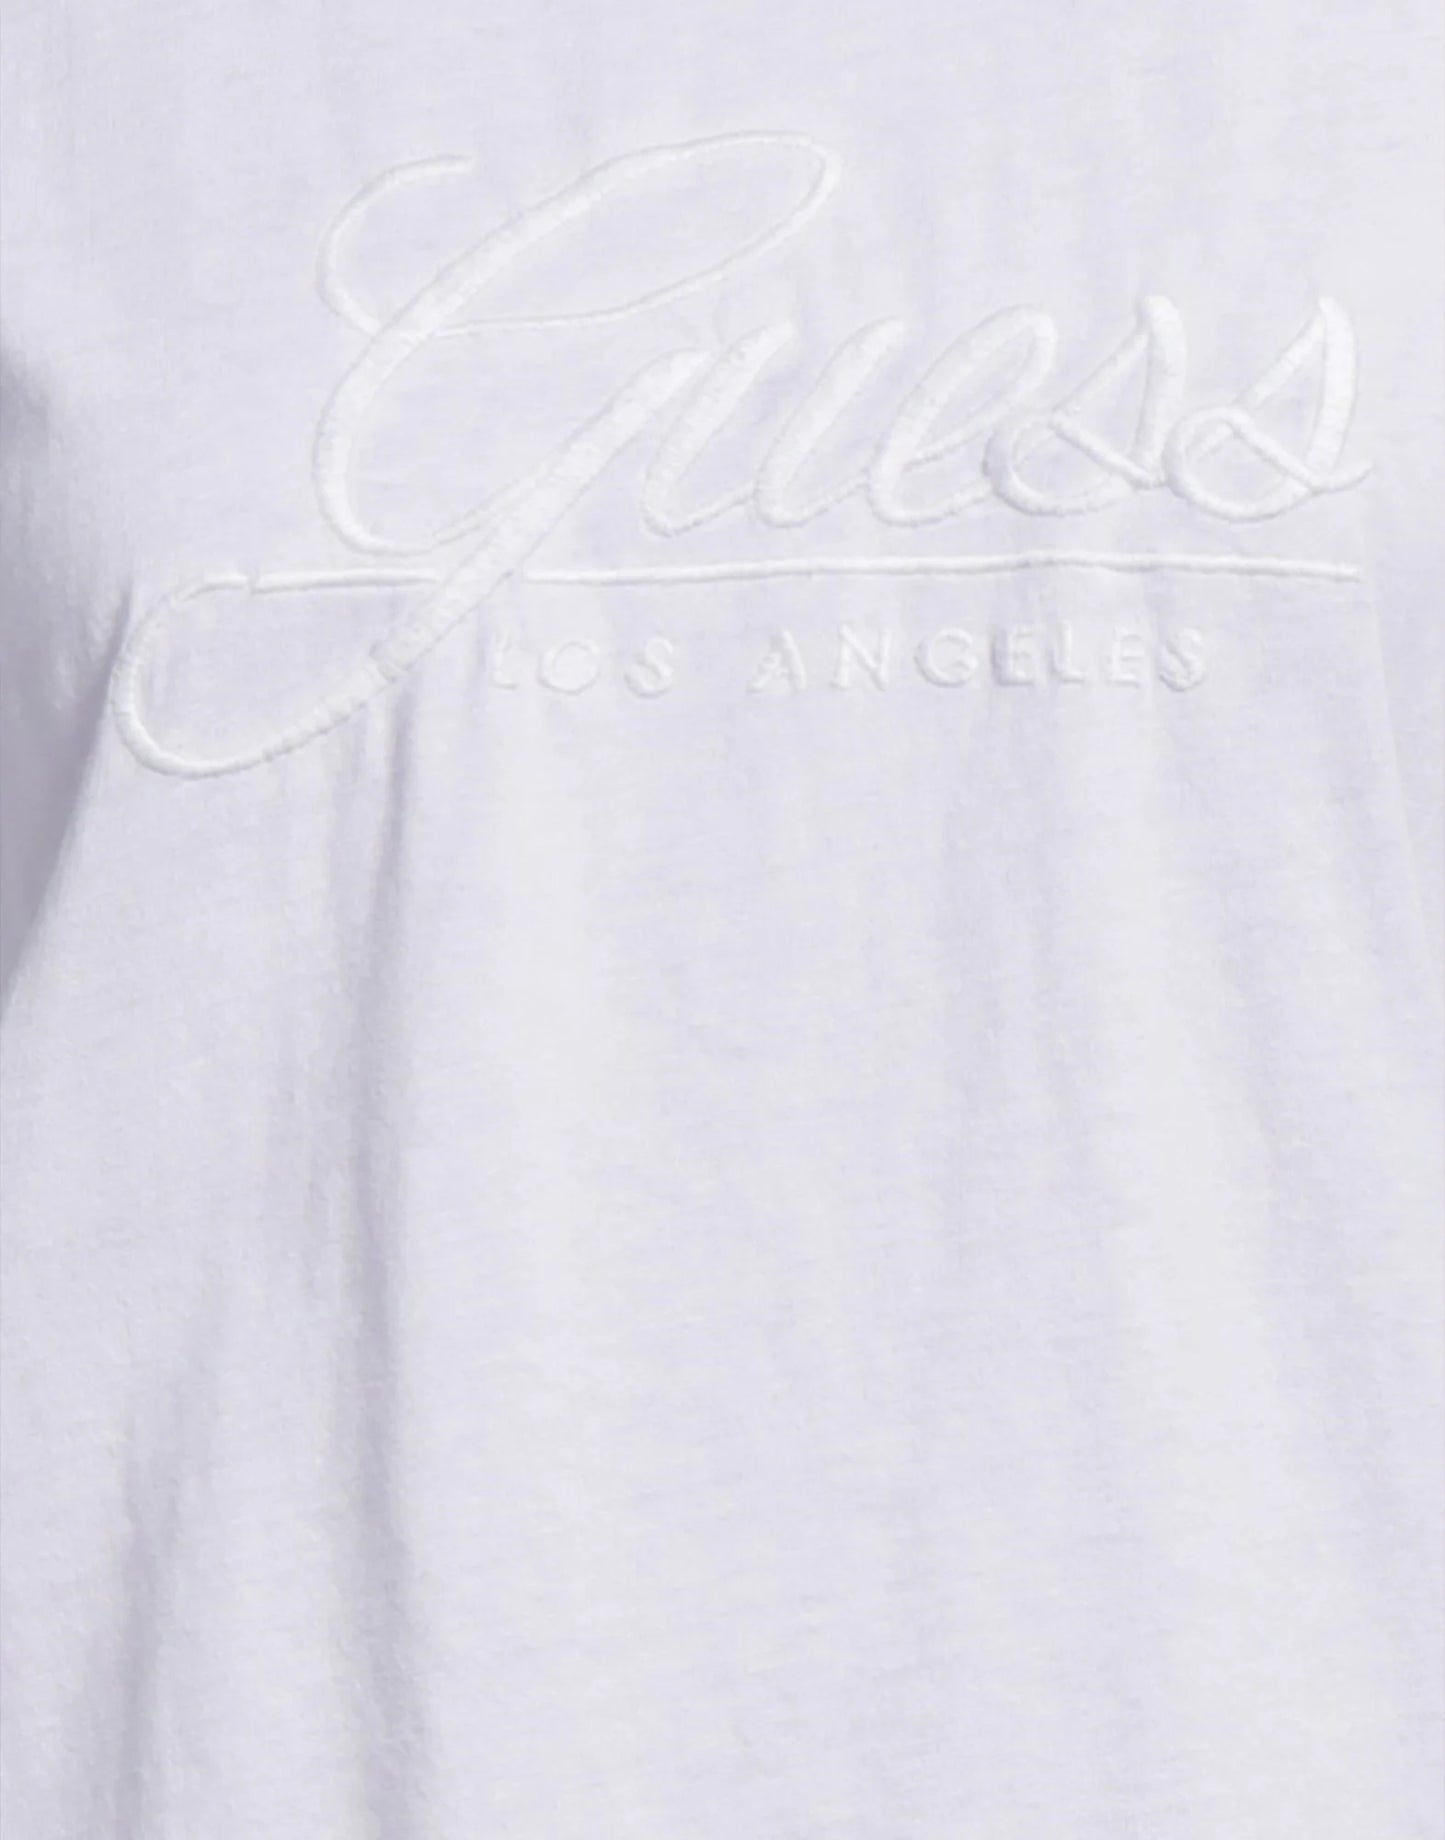 Guess Jeans Lilac T-Shirt